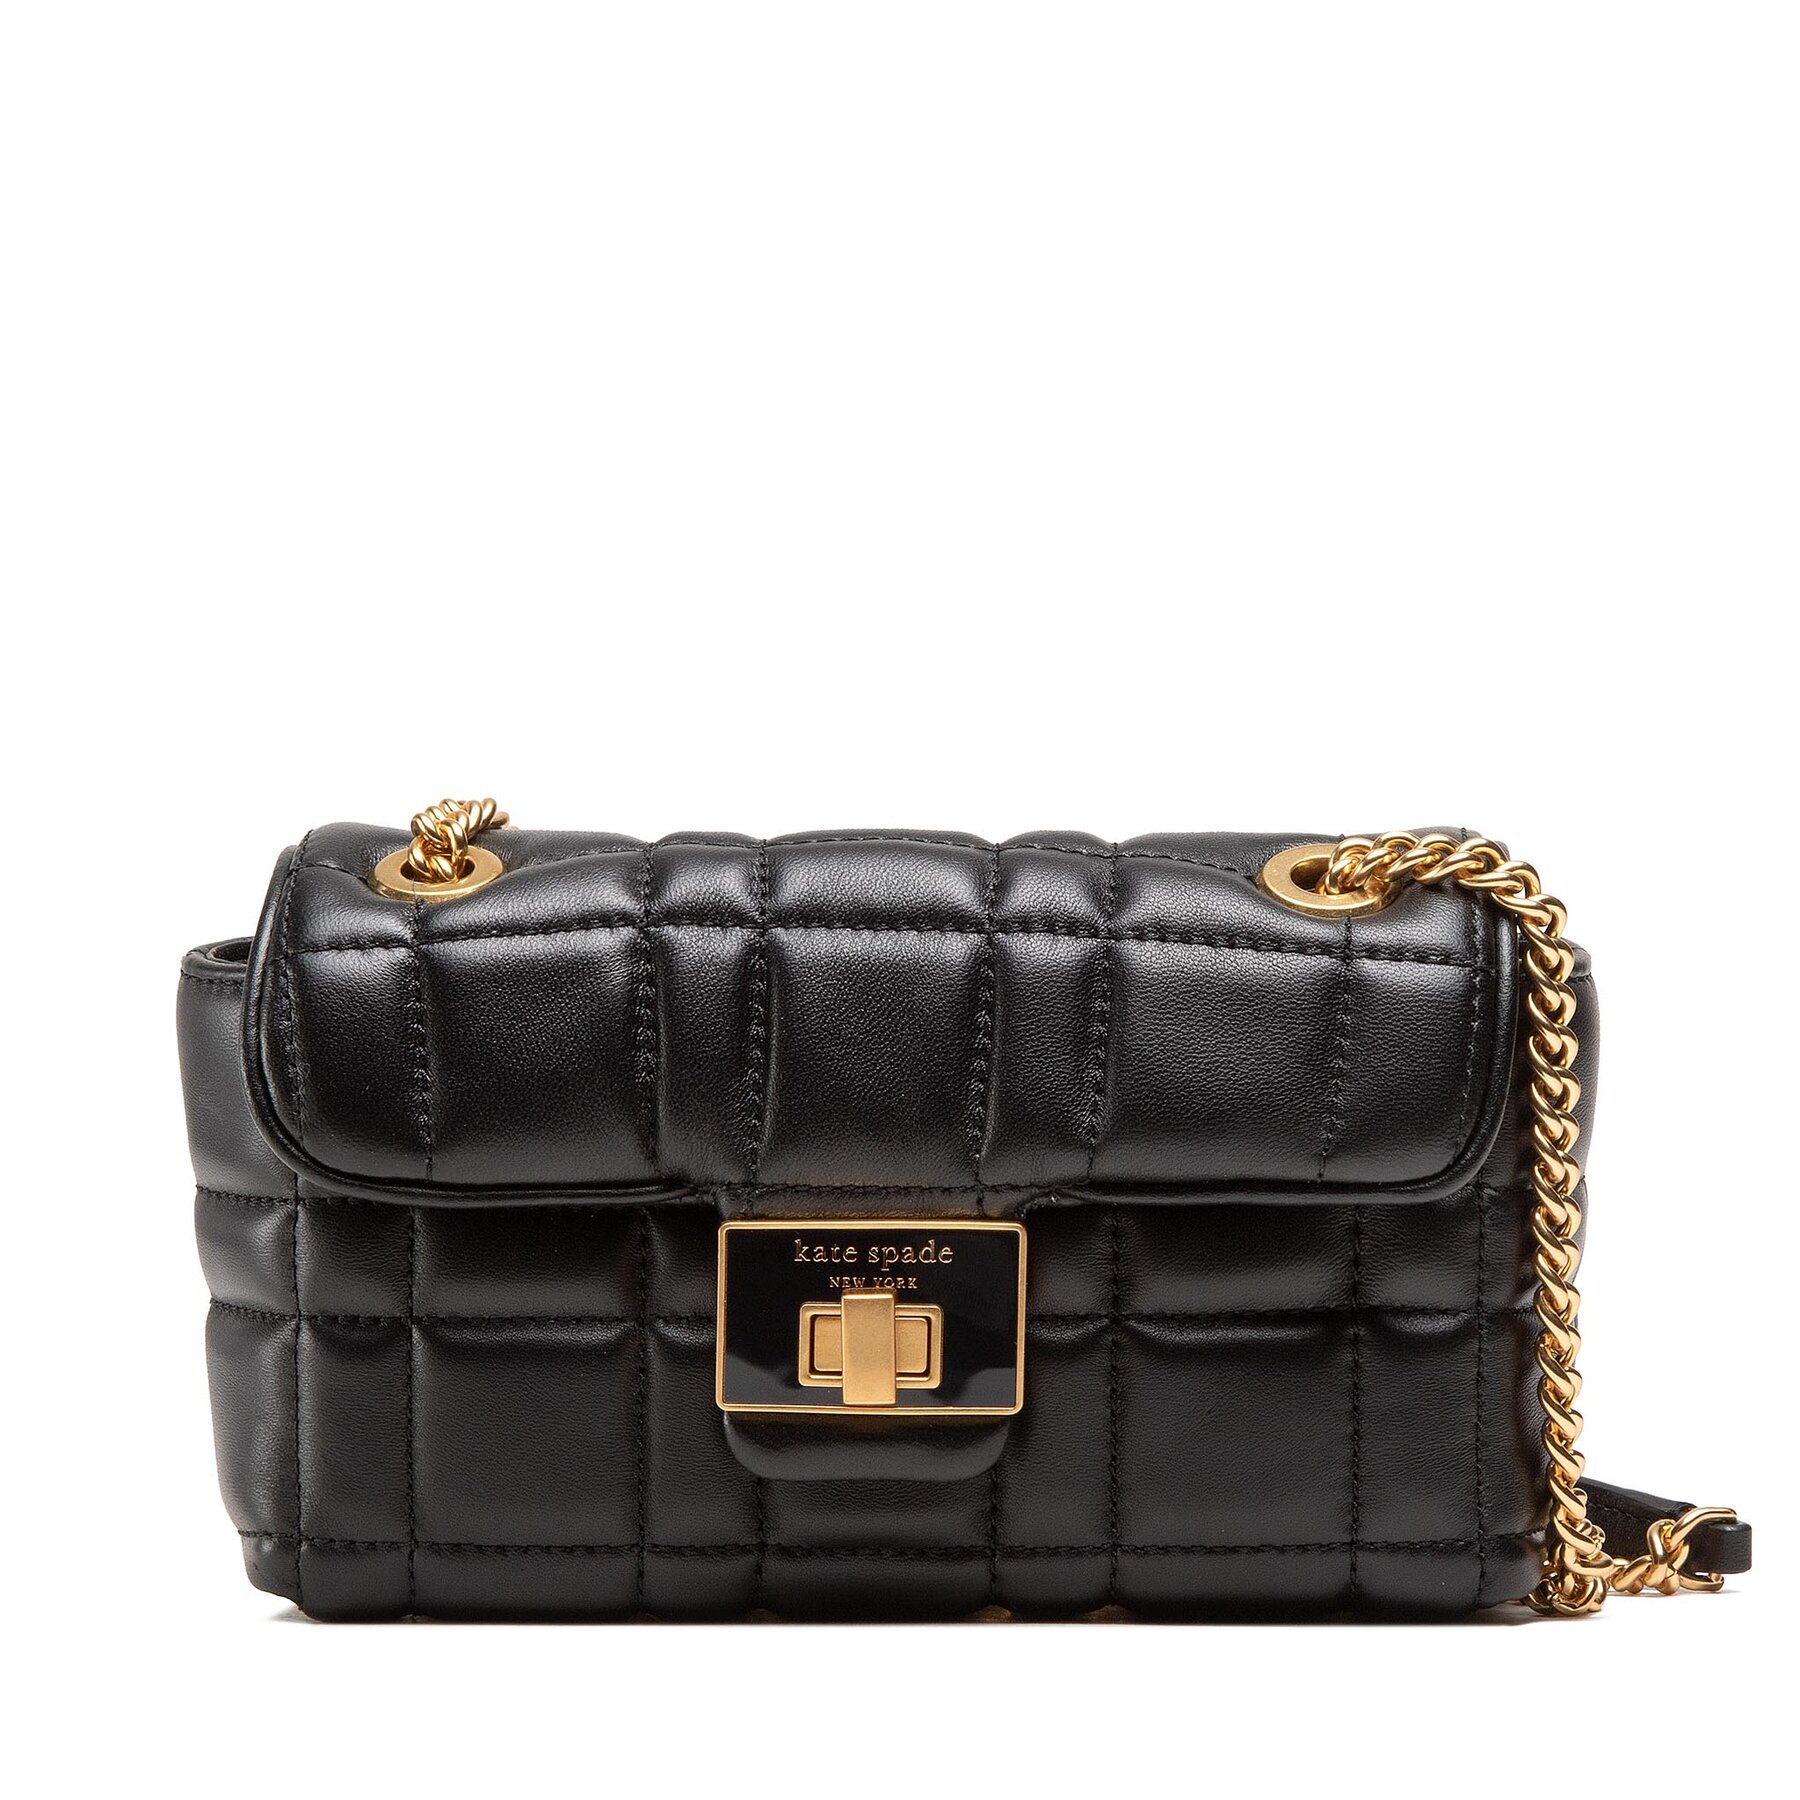 Geantă Kate Spade Evelyn Quilted Leatcher Small S K8932 Black